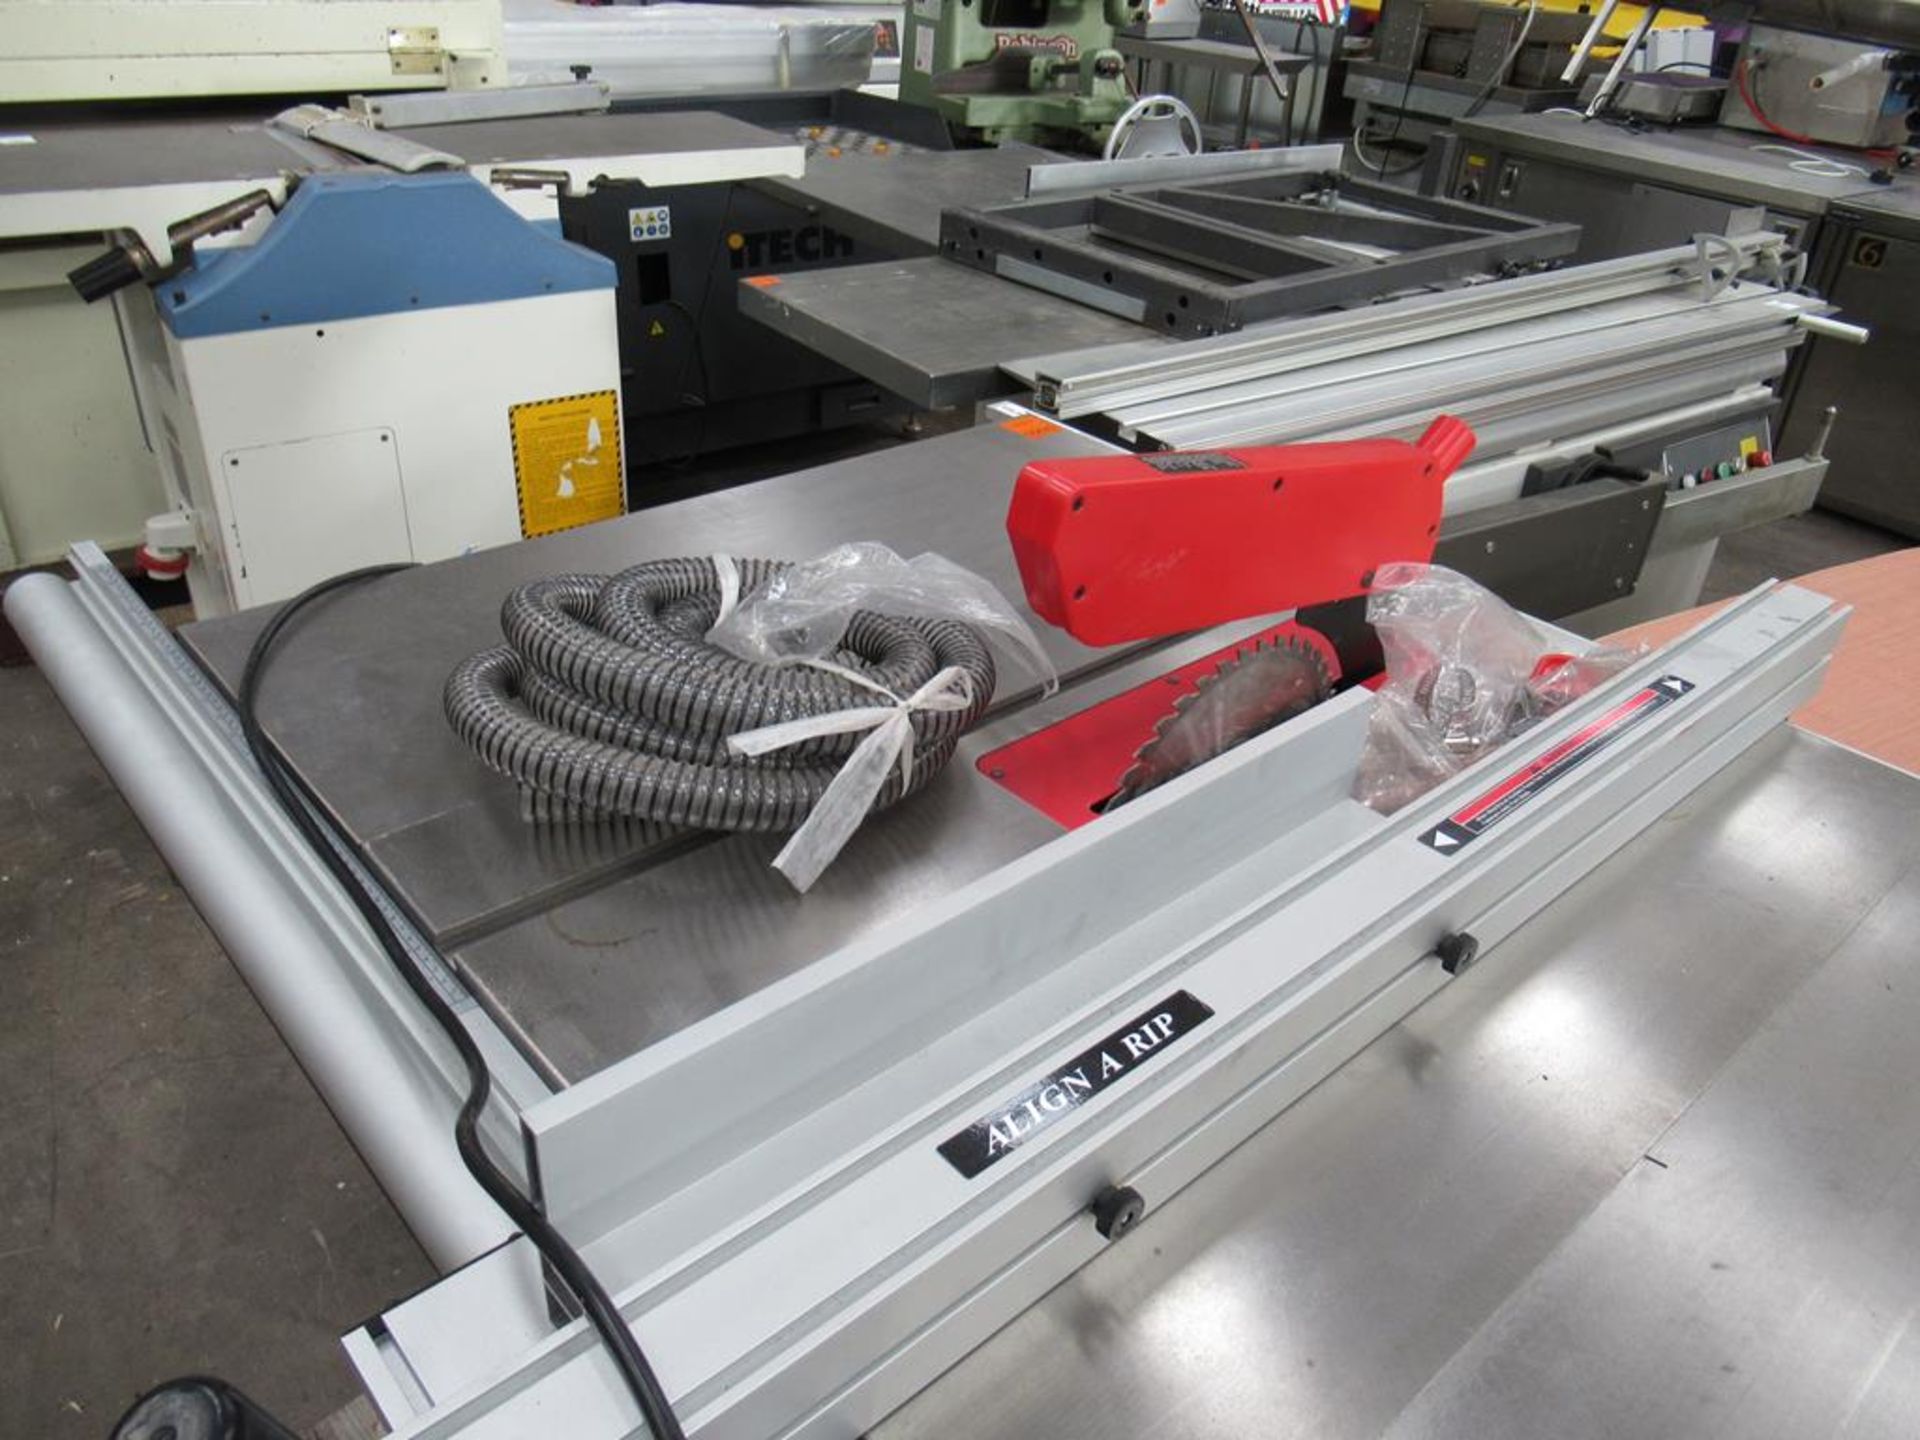 iTech 10" table saw model ITWM01332, 240V - Image 4 of 5